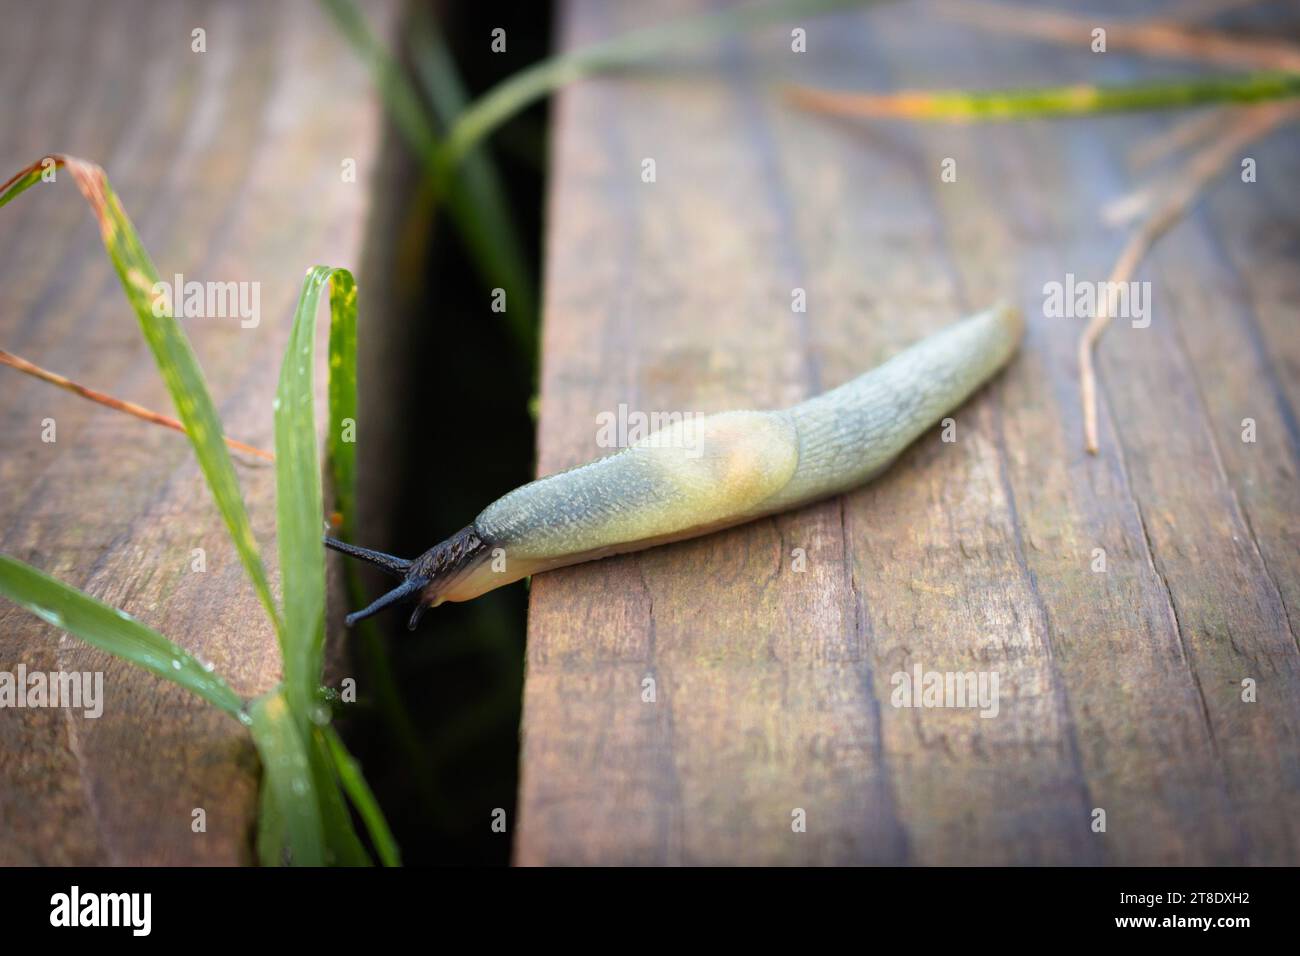 Snail on a wooden background. Snail without shell on wooden board. Helix with antenna in the garden. Wildlife, macro. Macro of gastropod. Stock Photo